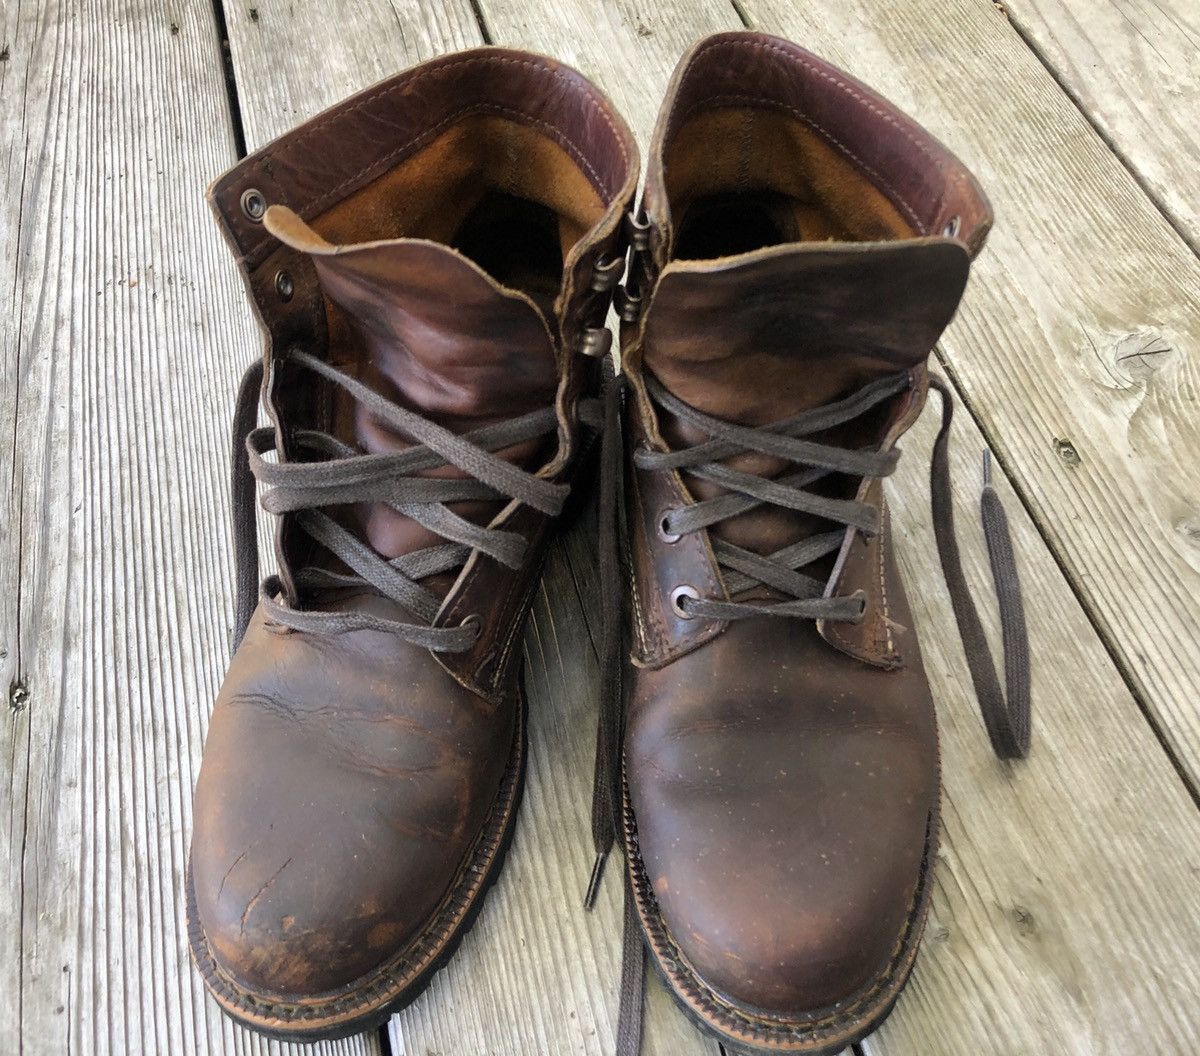 Wolverine Wolverine 1000 Mile Duvall Boots | Grailed